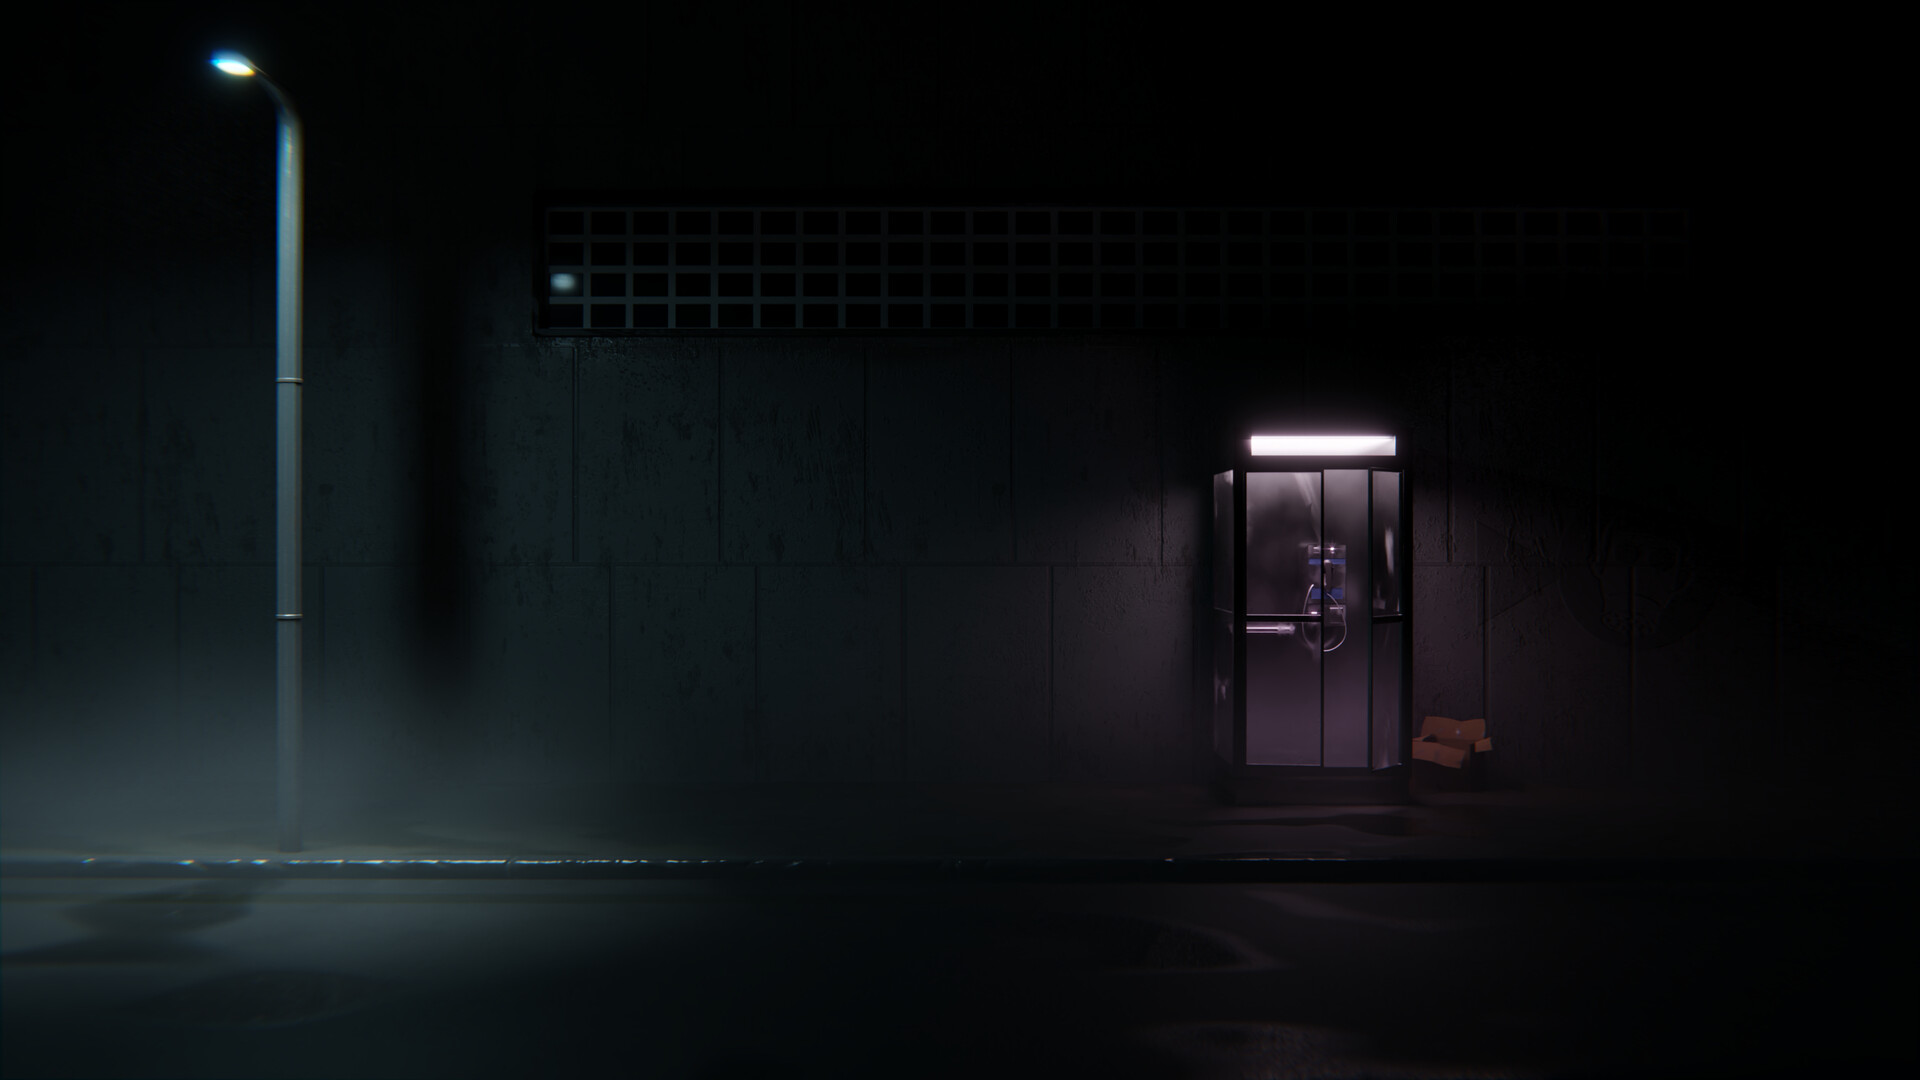 Late night phone call - Finished Projects - Blender Artists Community